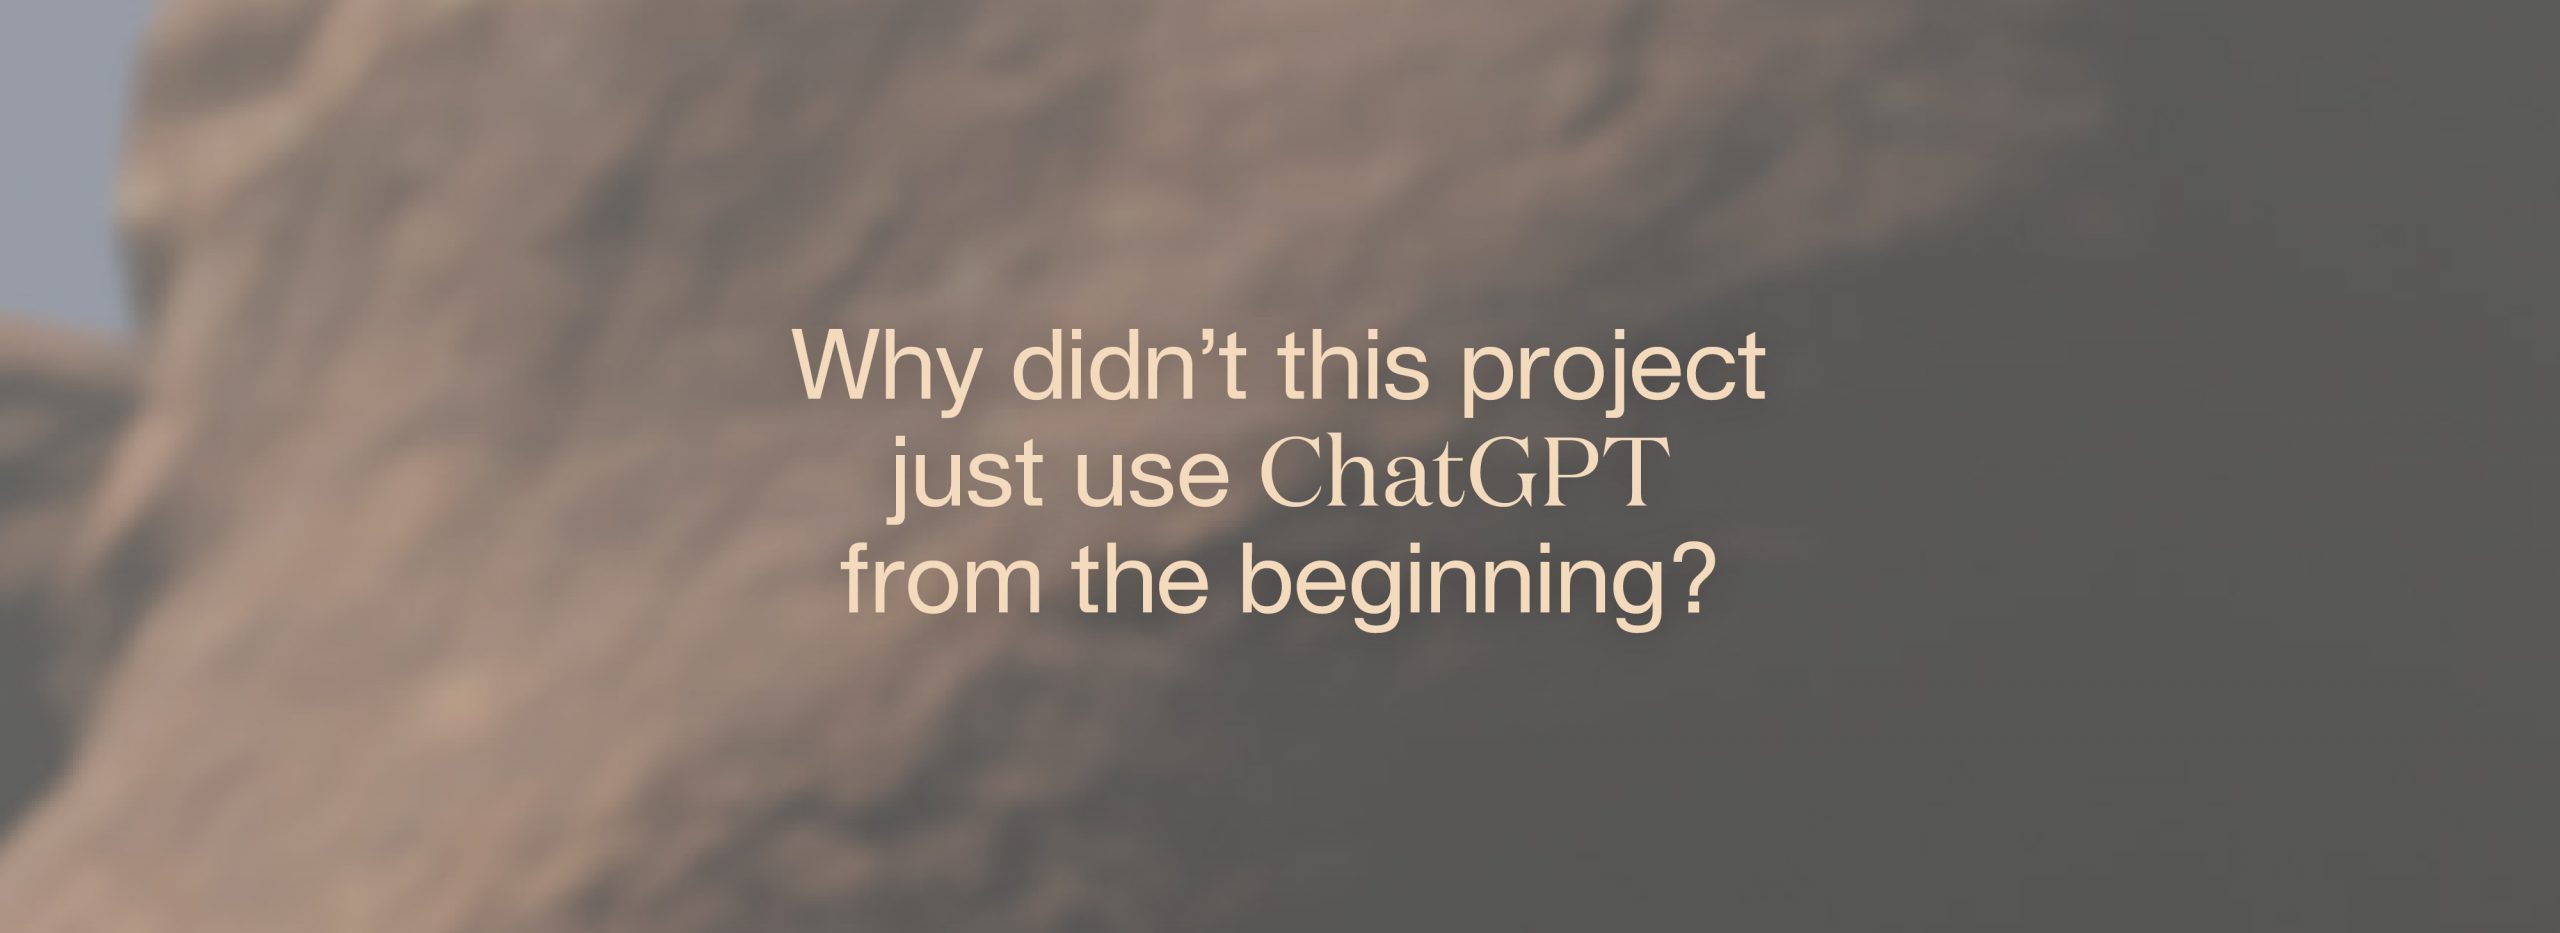 Why didn’t this project just use ChatGPT from the beginning?